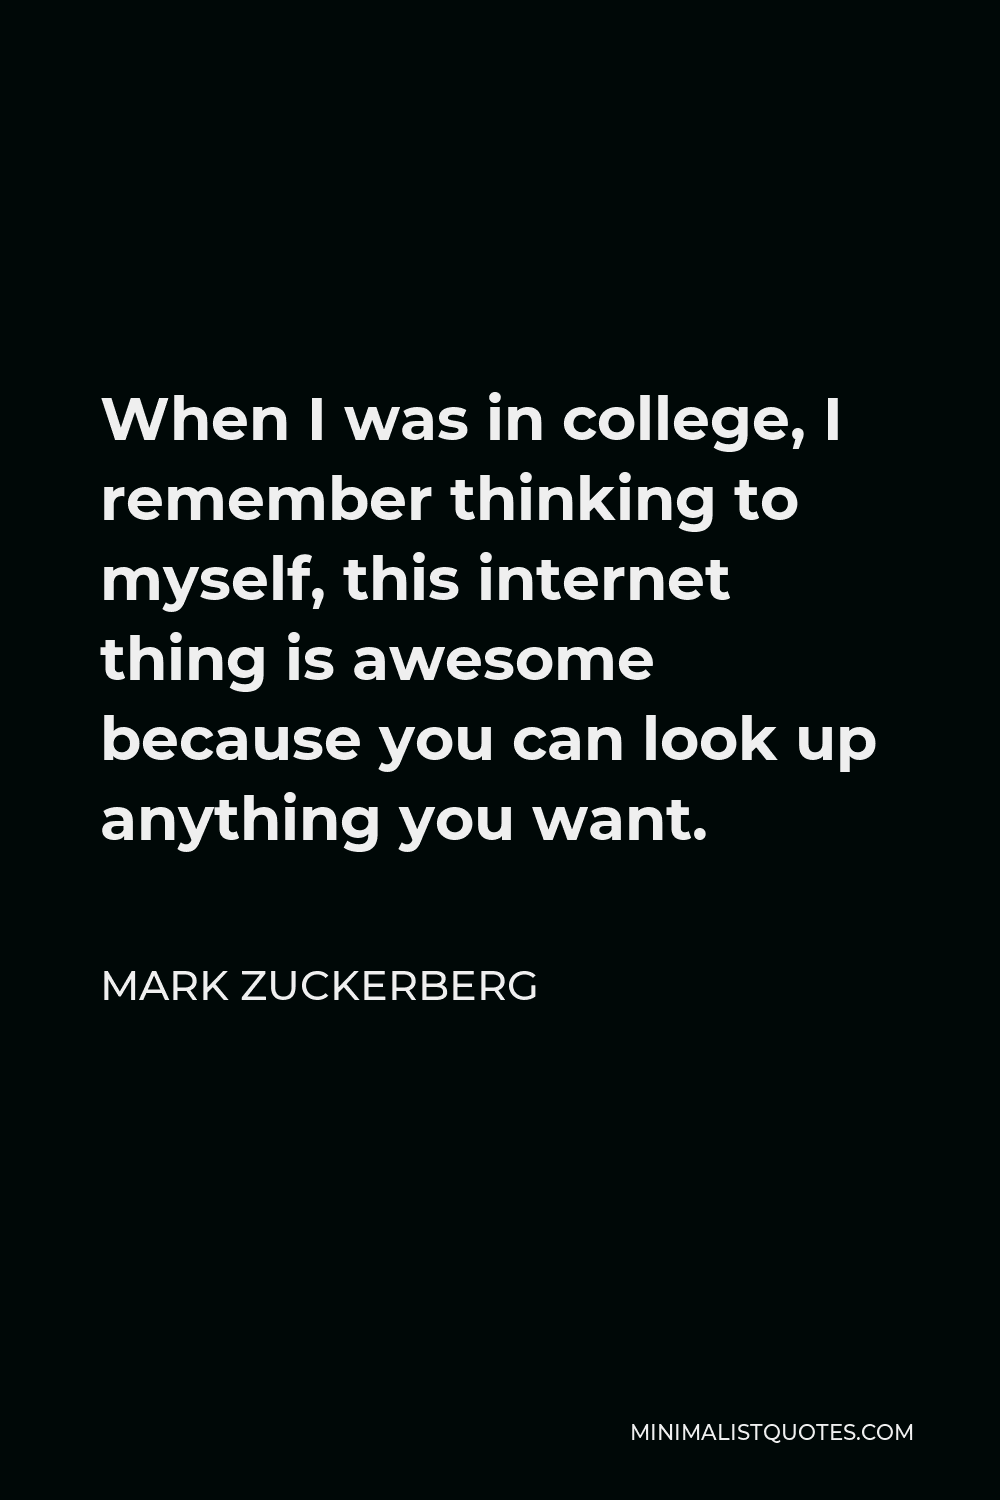 Mark Zuckerberg Quote - When I was in college, I remember thinking to myself, this internet thing is awesome because you can look up anything you want.